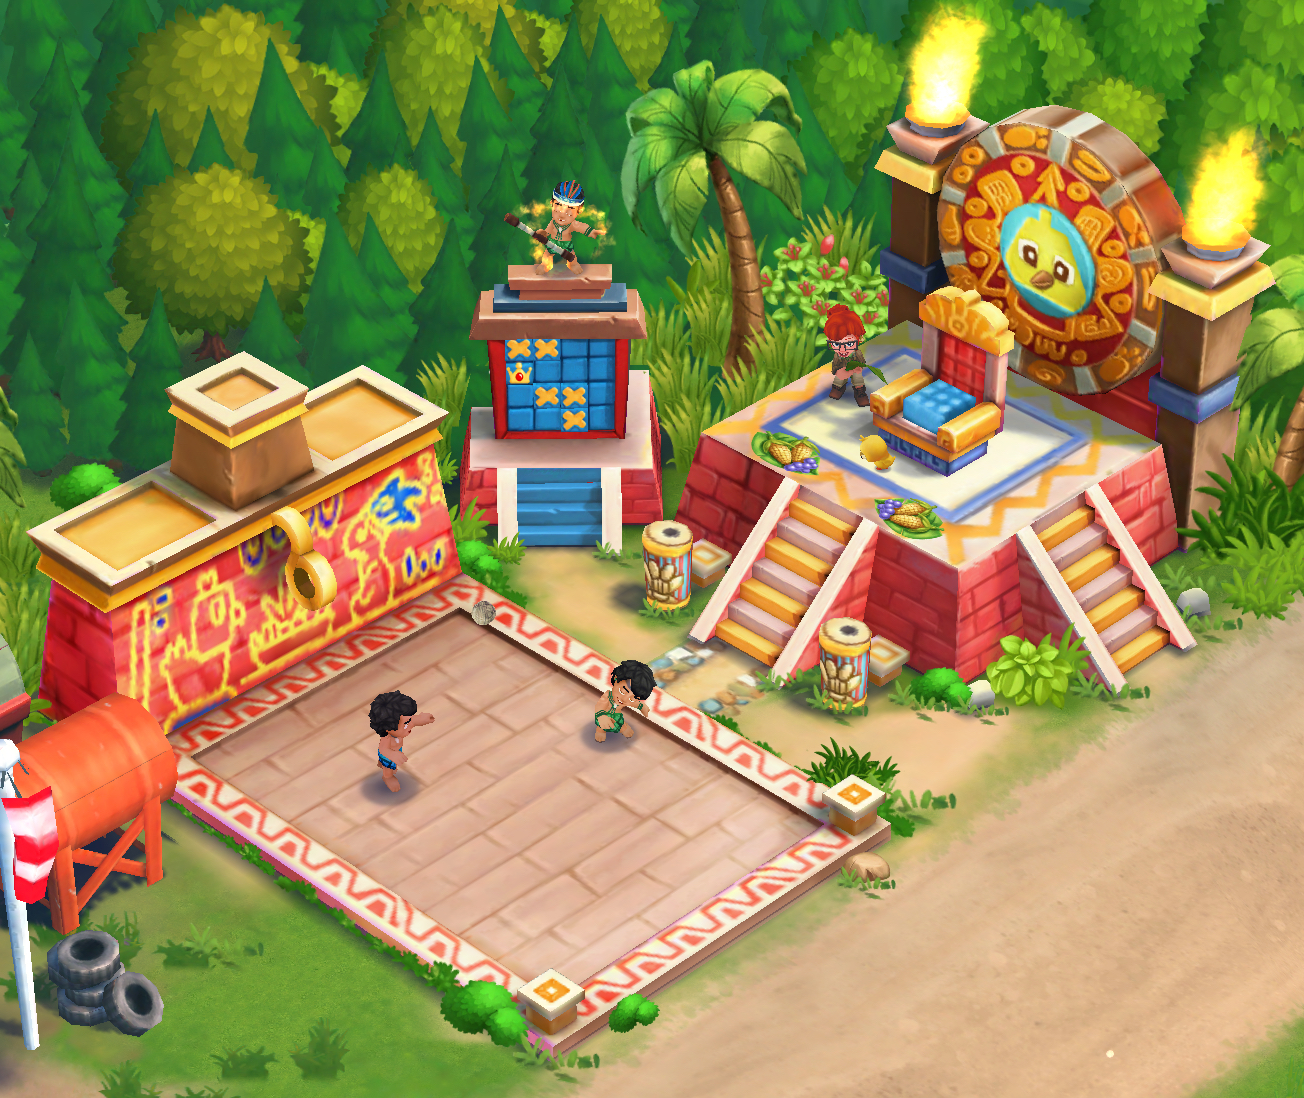 how to report cheaters zynga farmville 2 country escape